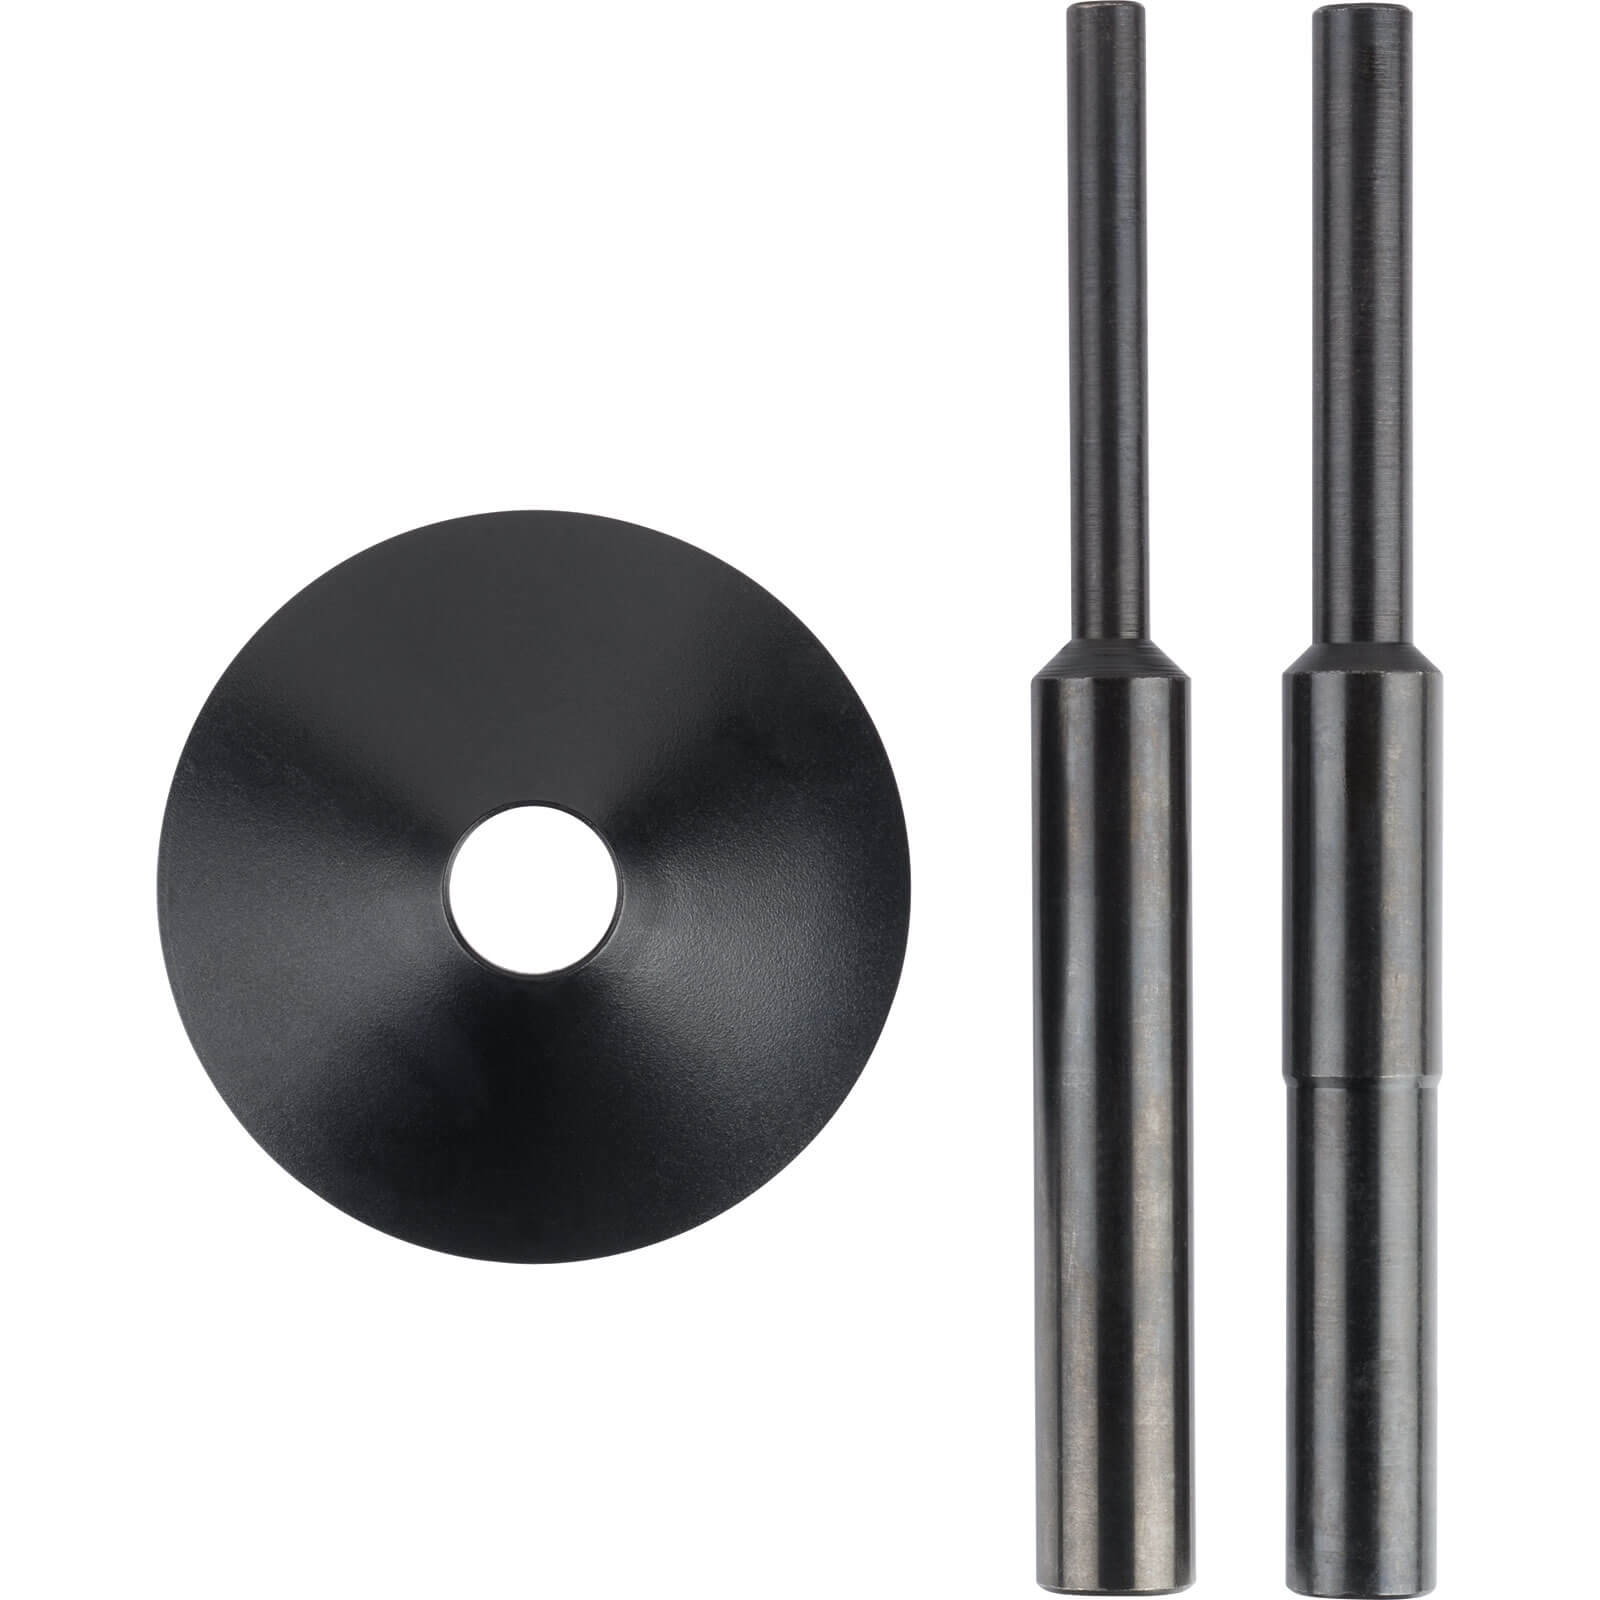 Image of Bosch 3 Piece Centering Pin Set for GOF and POF Routers